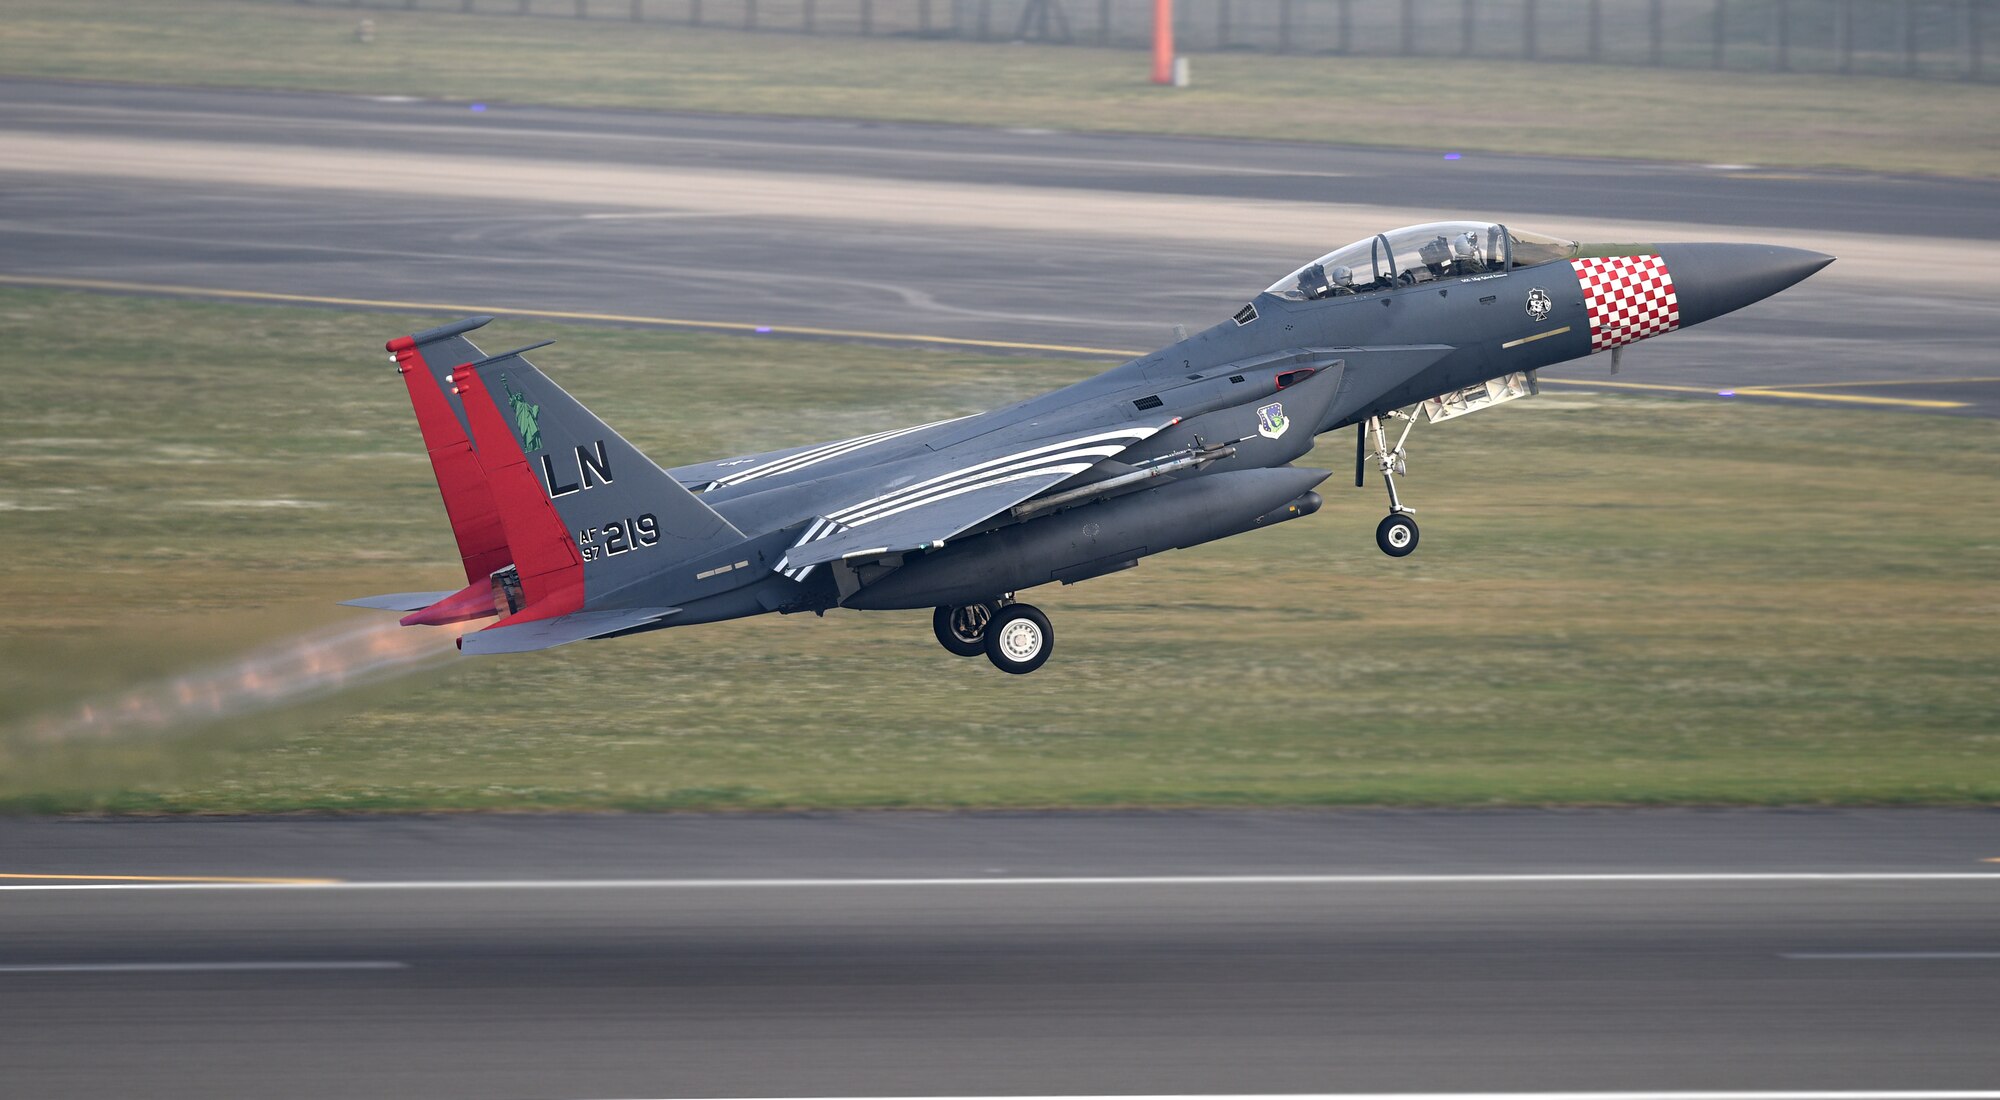 An F-15E Strike Eagle painted in the 492nd Fighter Squadron’s heritage colors, inspired by its P-47 Thunderbolt predecessor, takes off from the flight line at Royal Air Force Lakenheath, England, April 24, 2019. The 48th Fighter Wing is participating in a readiness exercise from 23-25 April focused on continuous operations over a 48-hour period. (U.S. Air Force photo by Airman 1st Class Madeline Herzog)